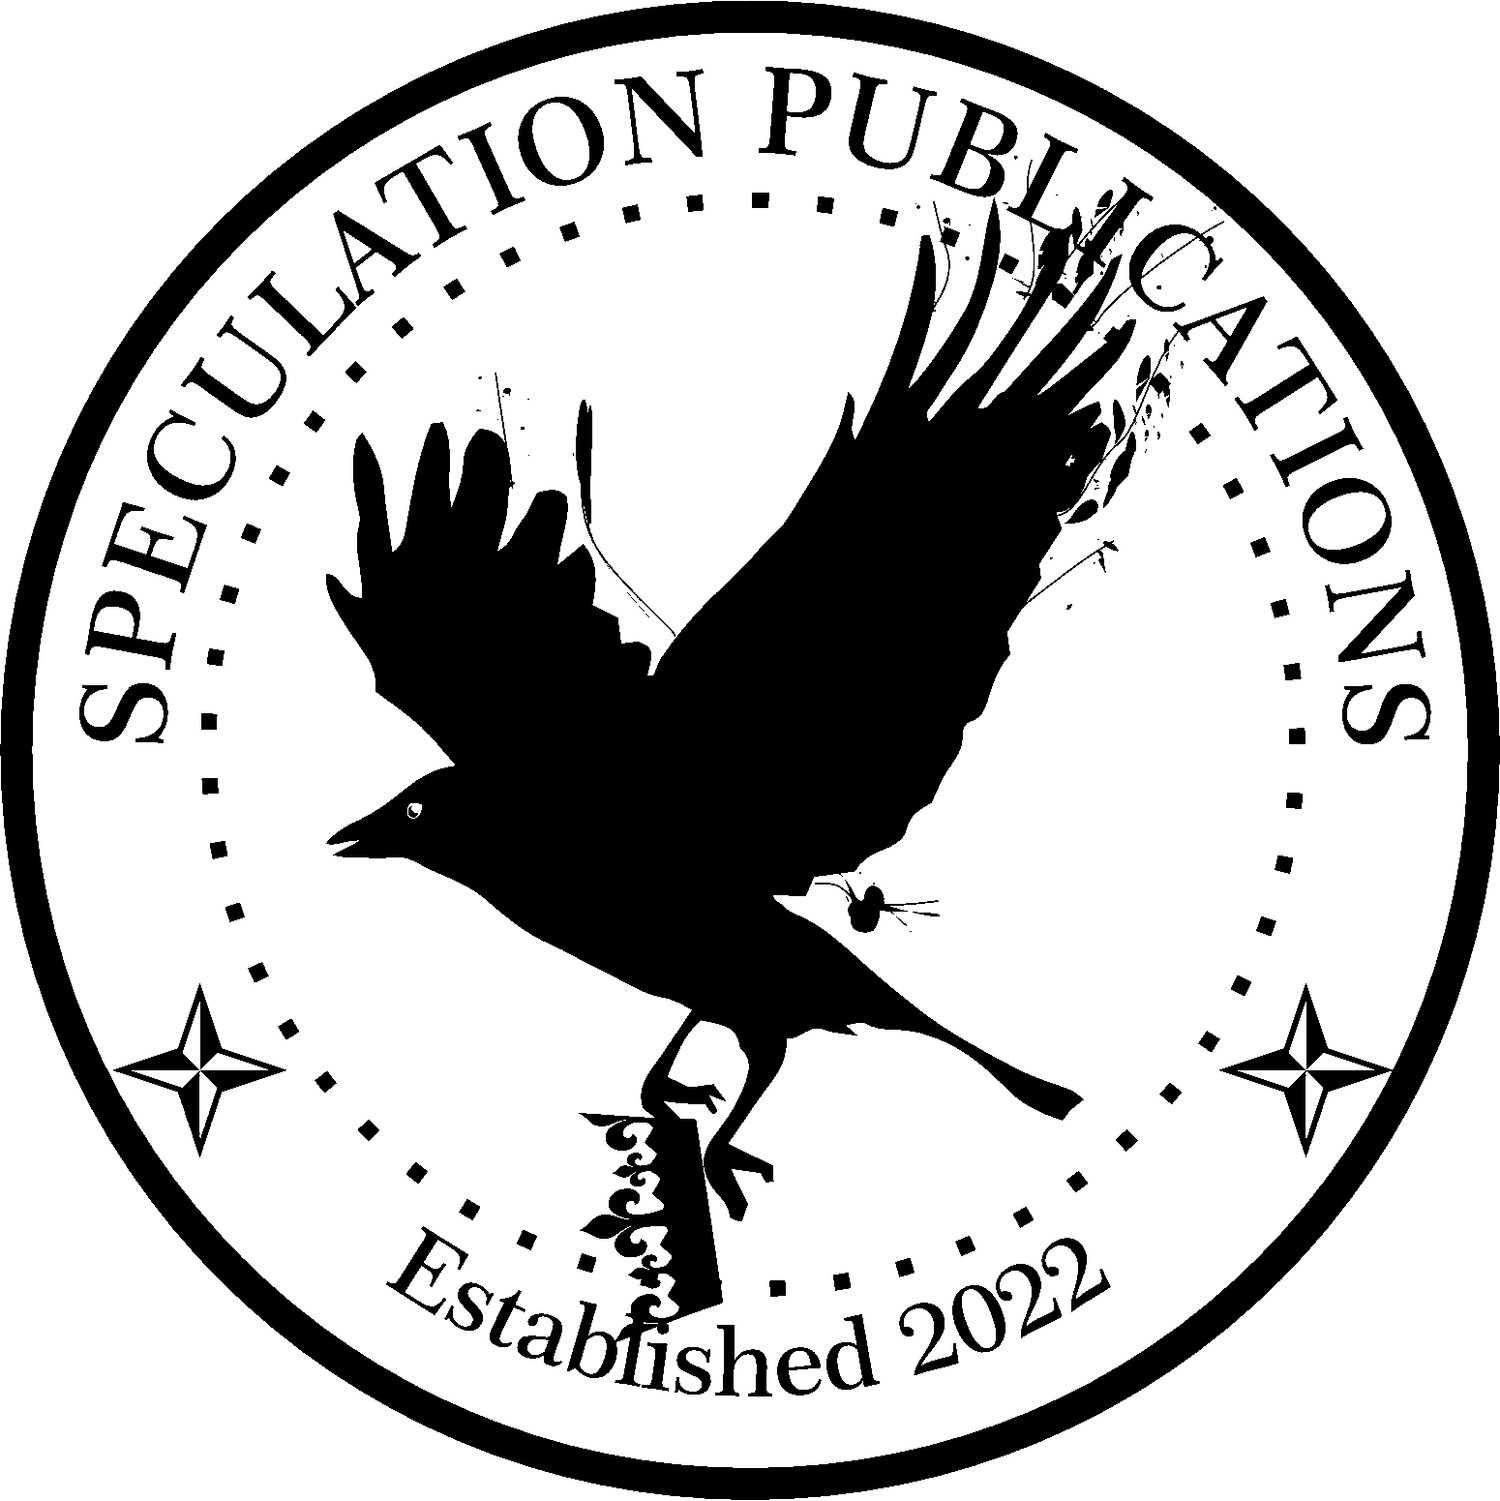 Speculation Publications